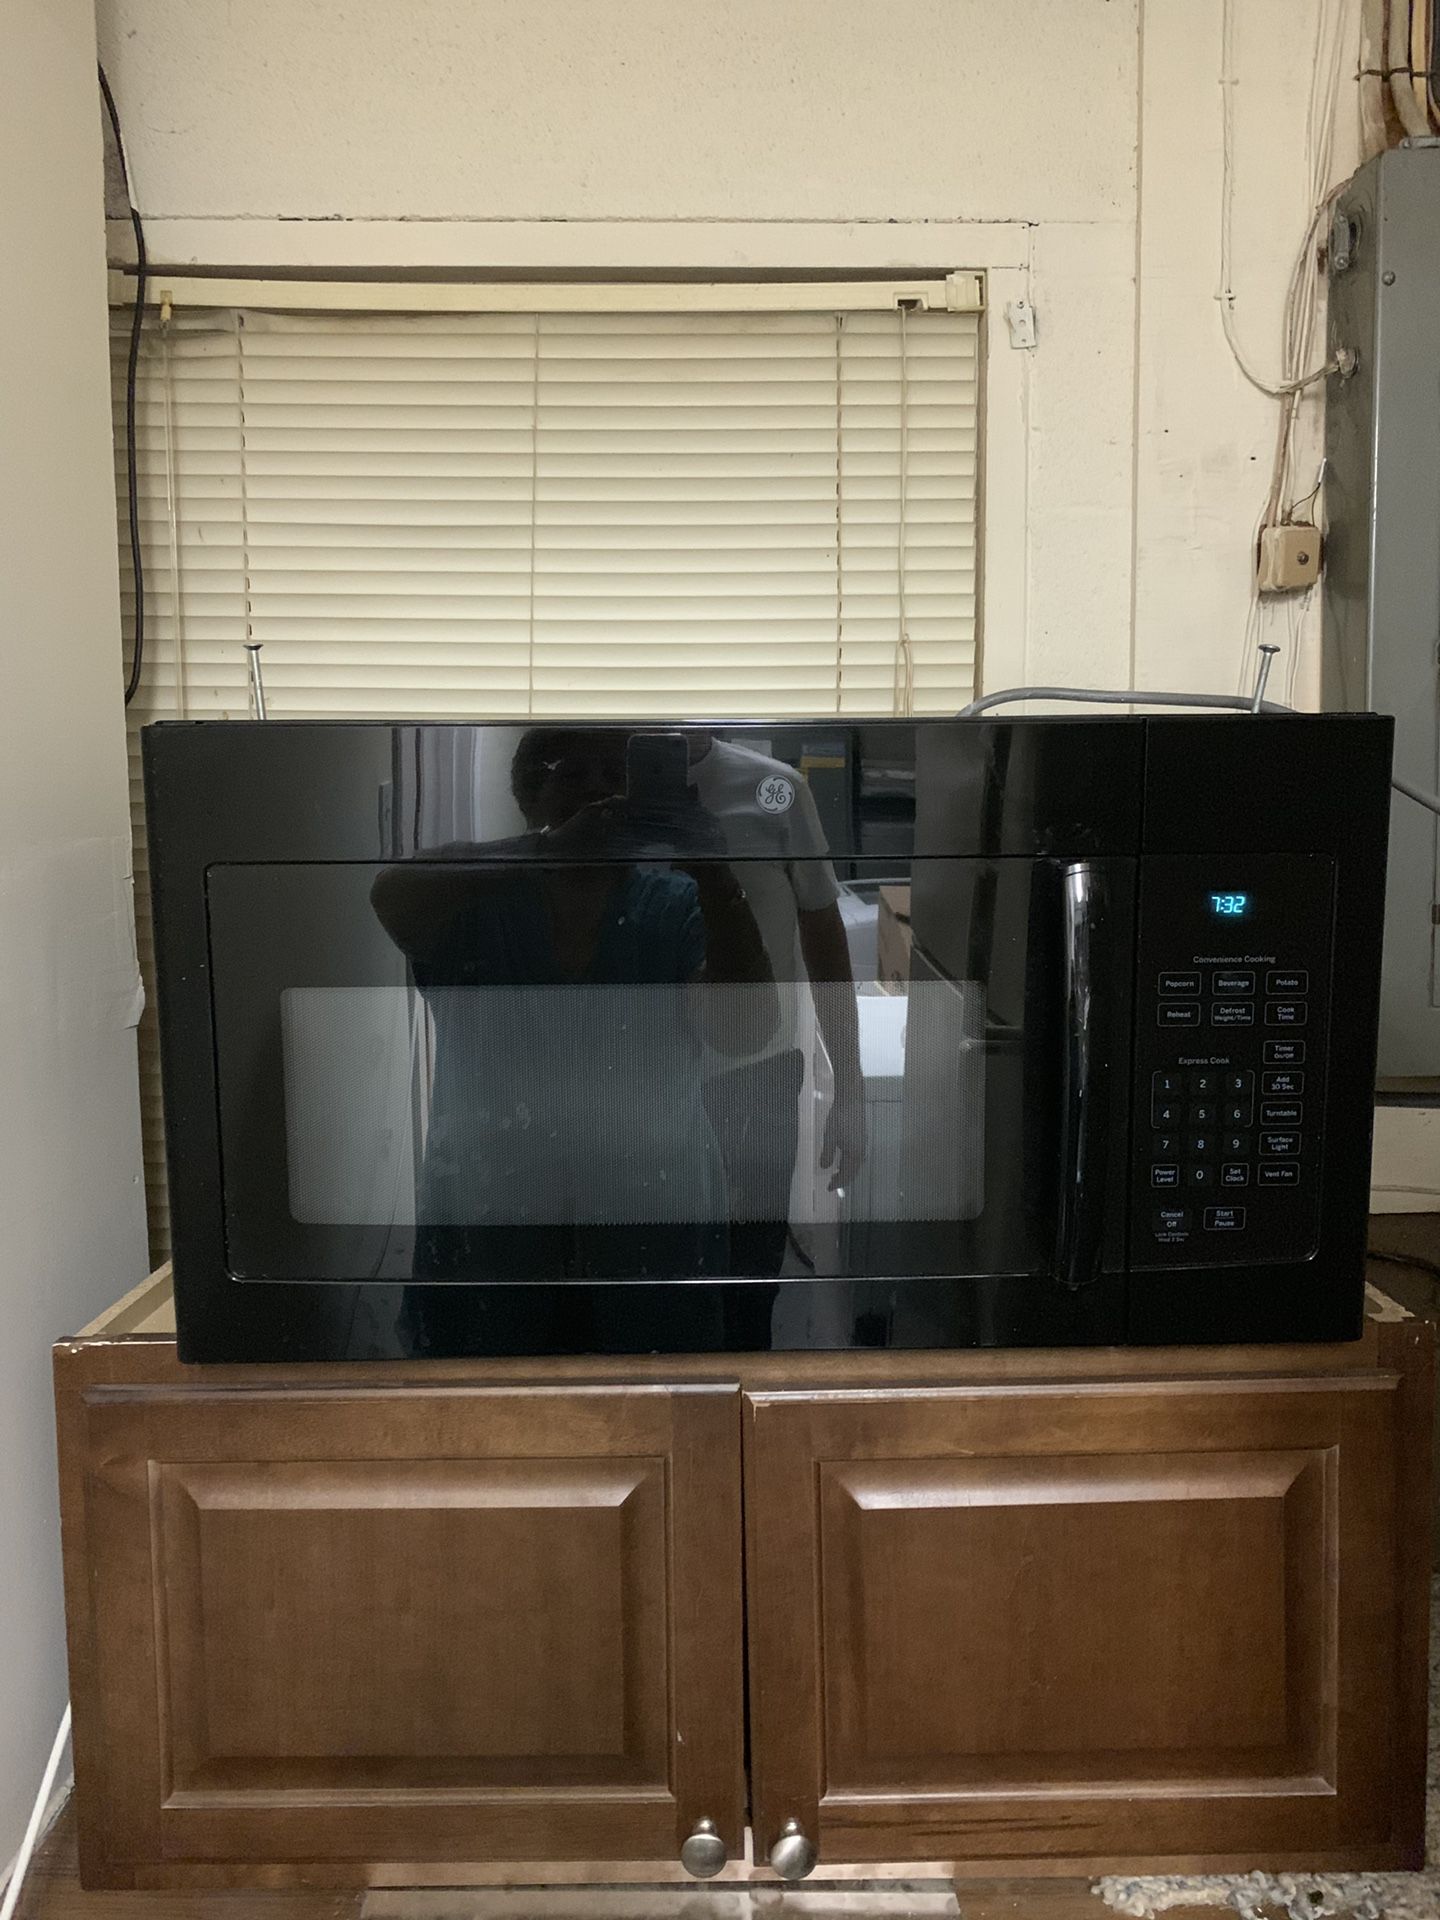 GE 1.7 cu ft. Microwave w/sensor cooking black color 30” in great condition.